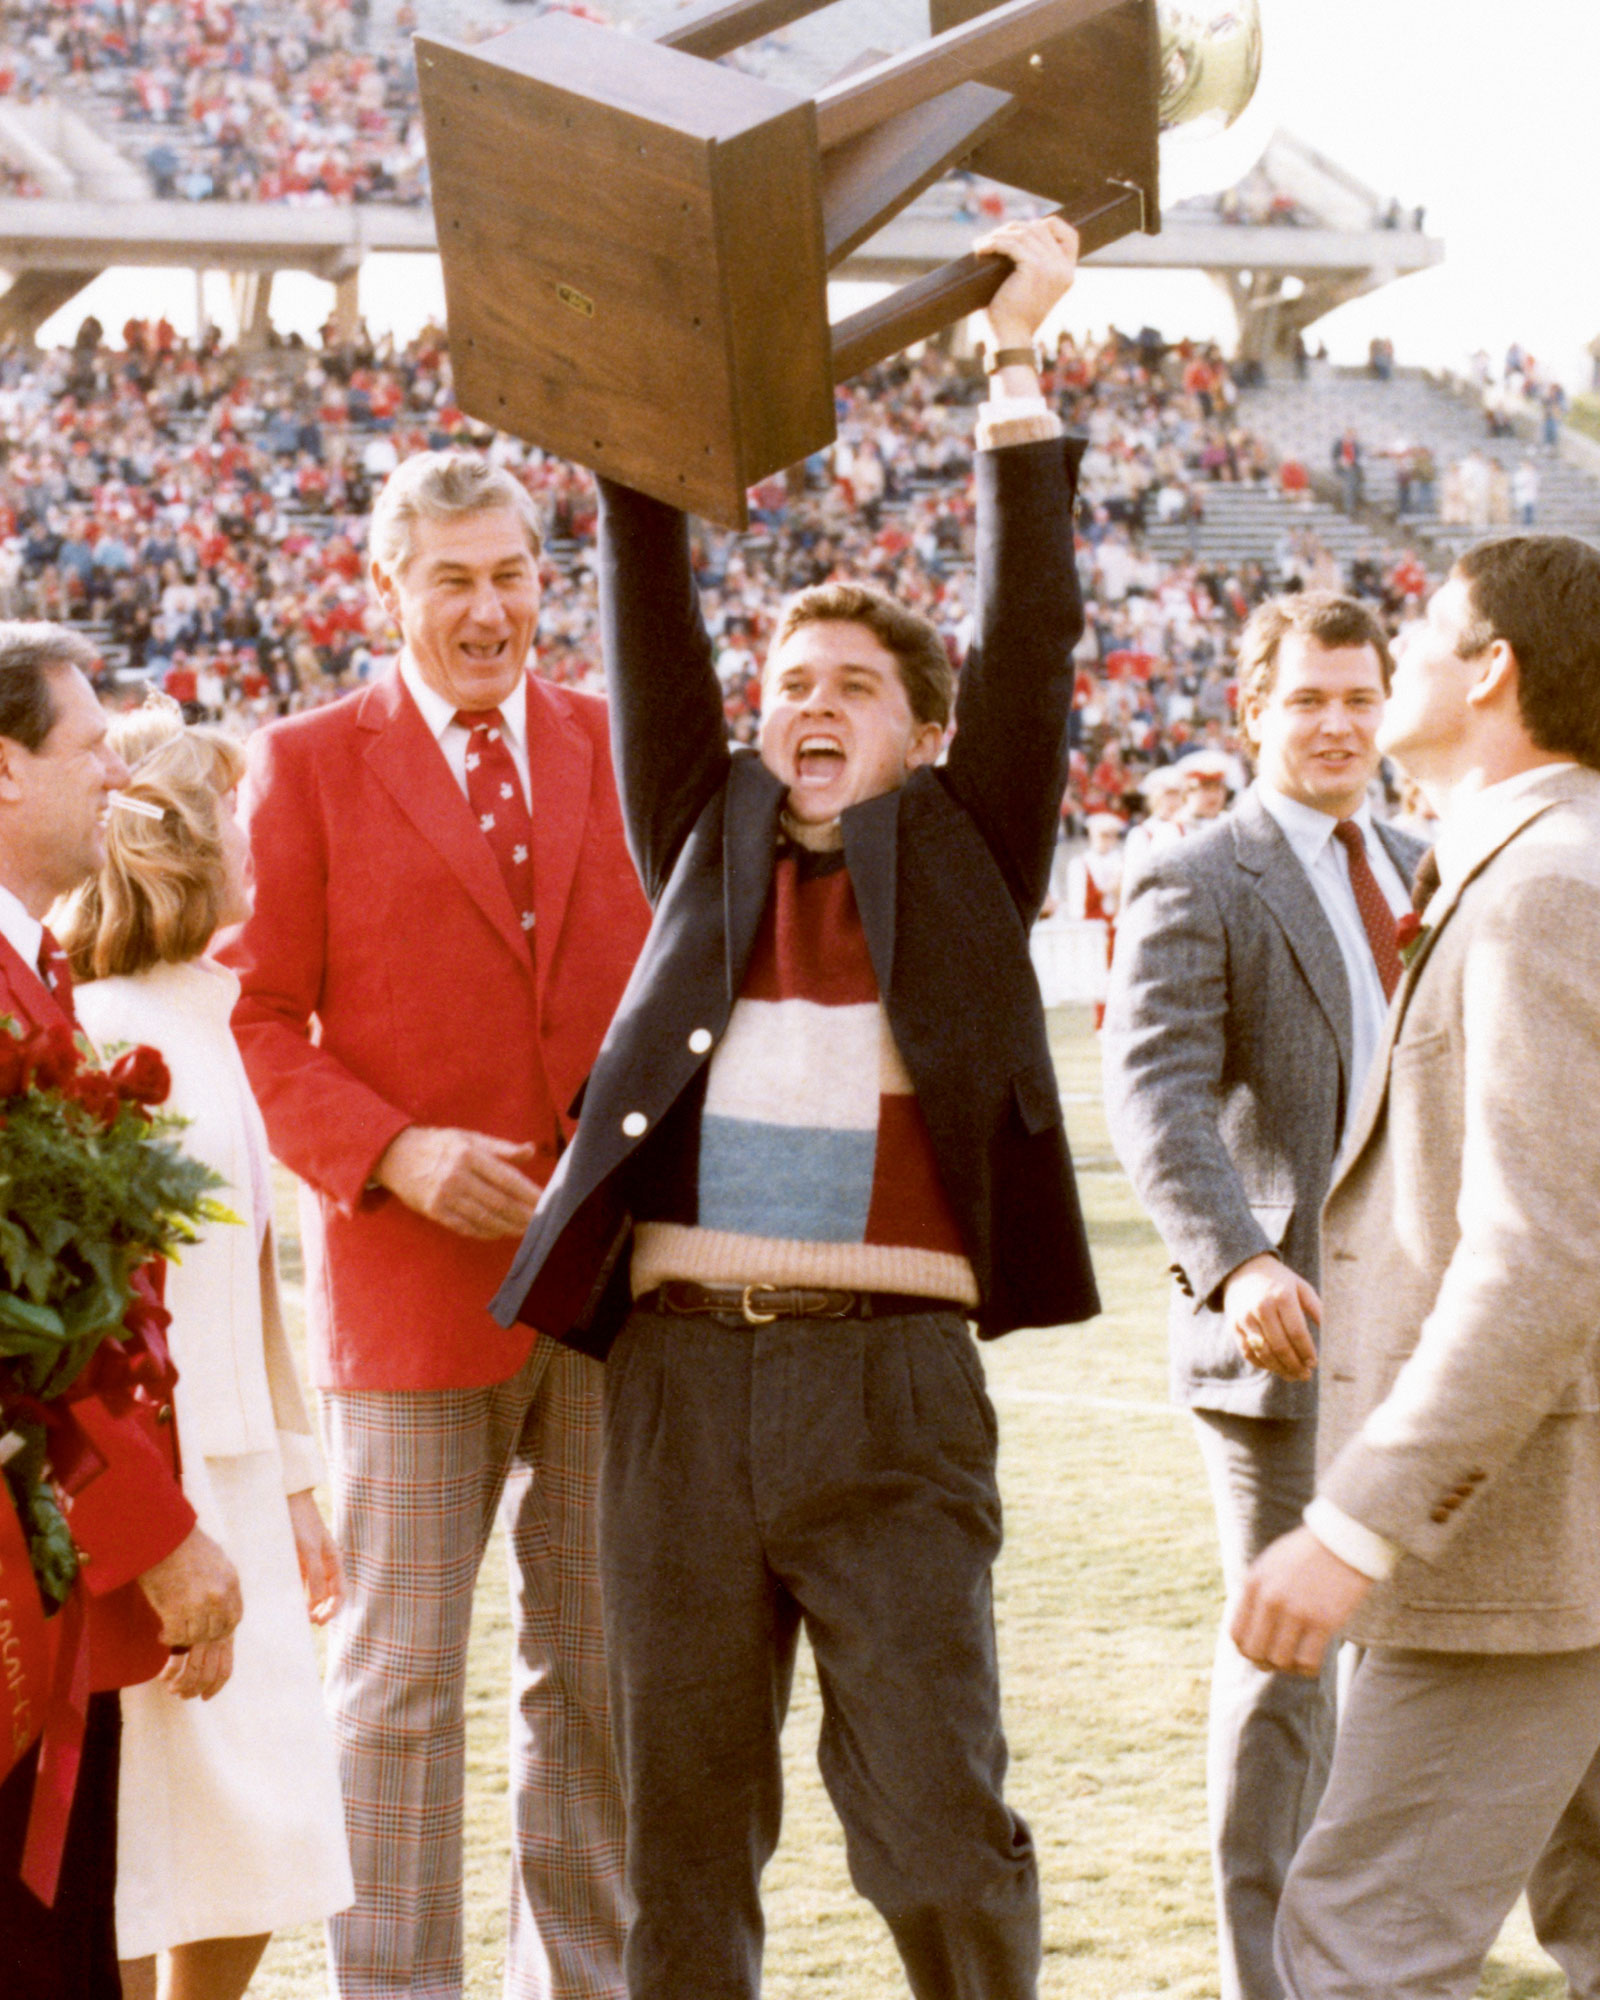 A photograph of a member of the Farmhouse fraternity hoisting the Interfraternity Council Caldwell Cup at North Carolina State University, September nineteen eighty-four.